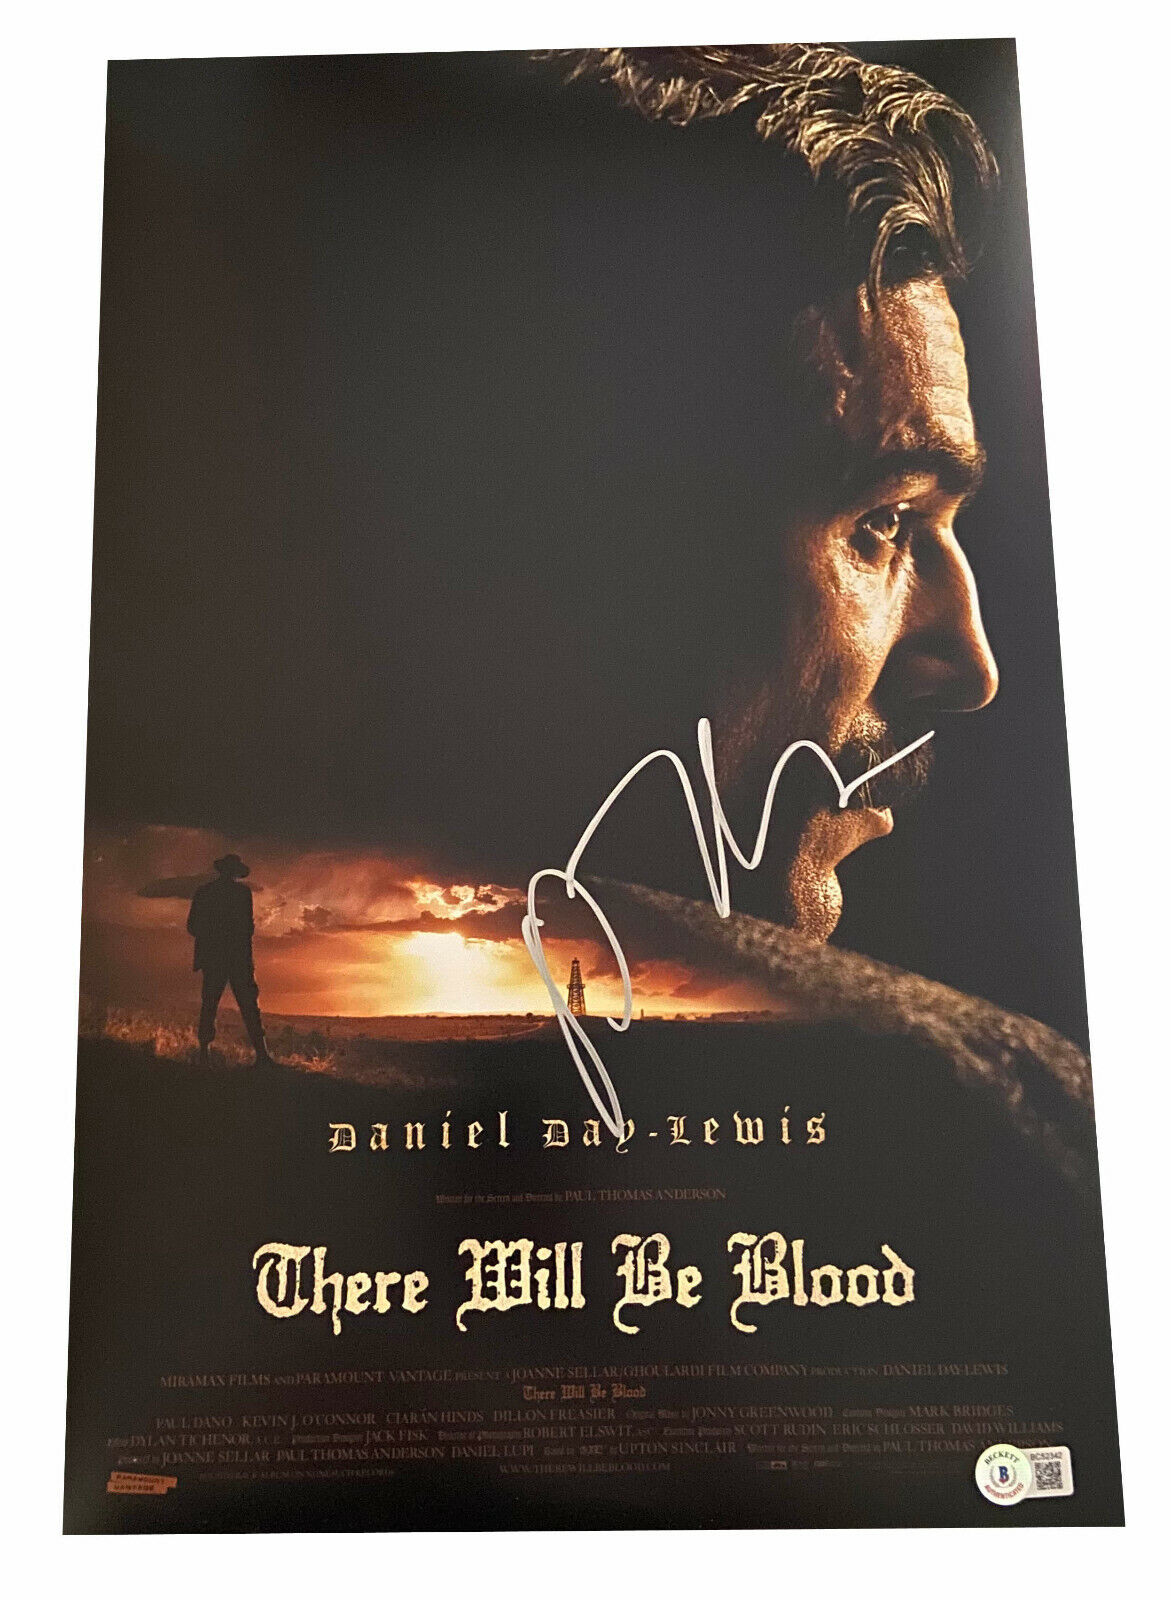 PAUL THOMAS ANDERSON SIGNED AUTOGRAPH 12X18 THERE WILL BE BLOOD PHOTO BECKETT 